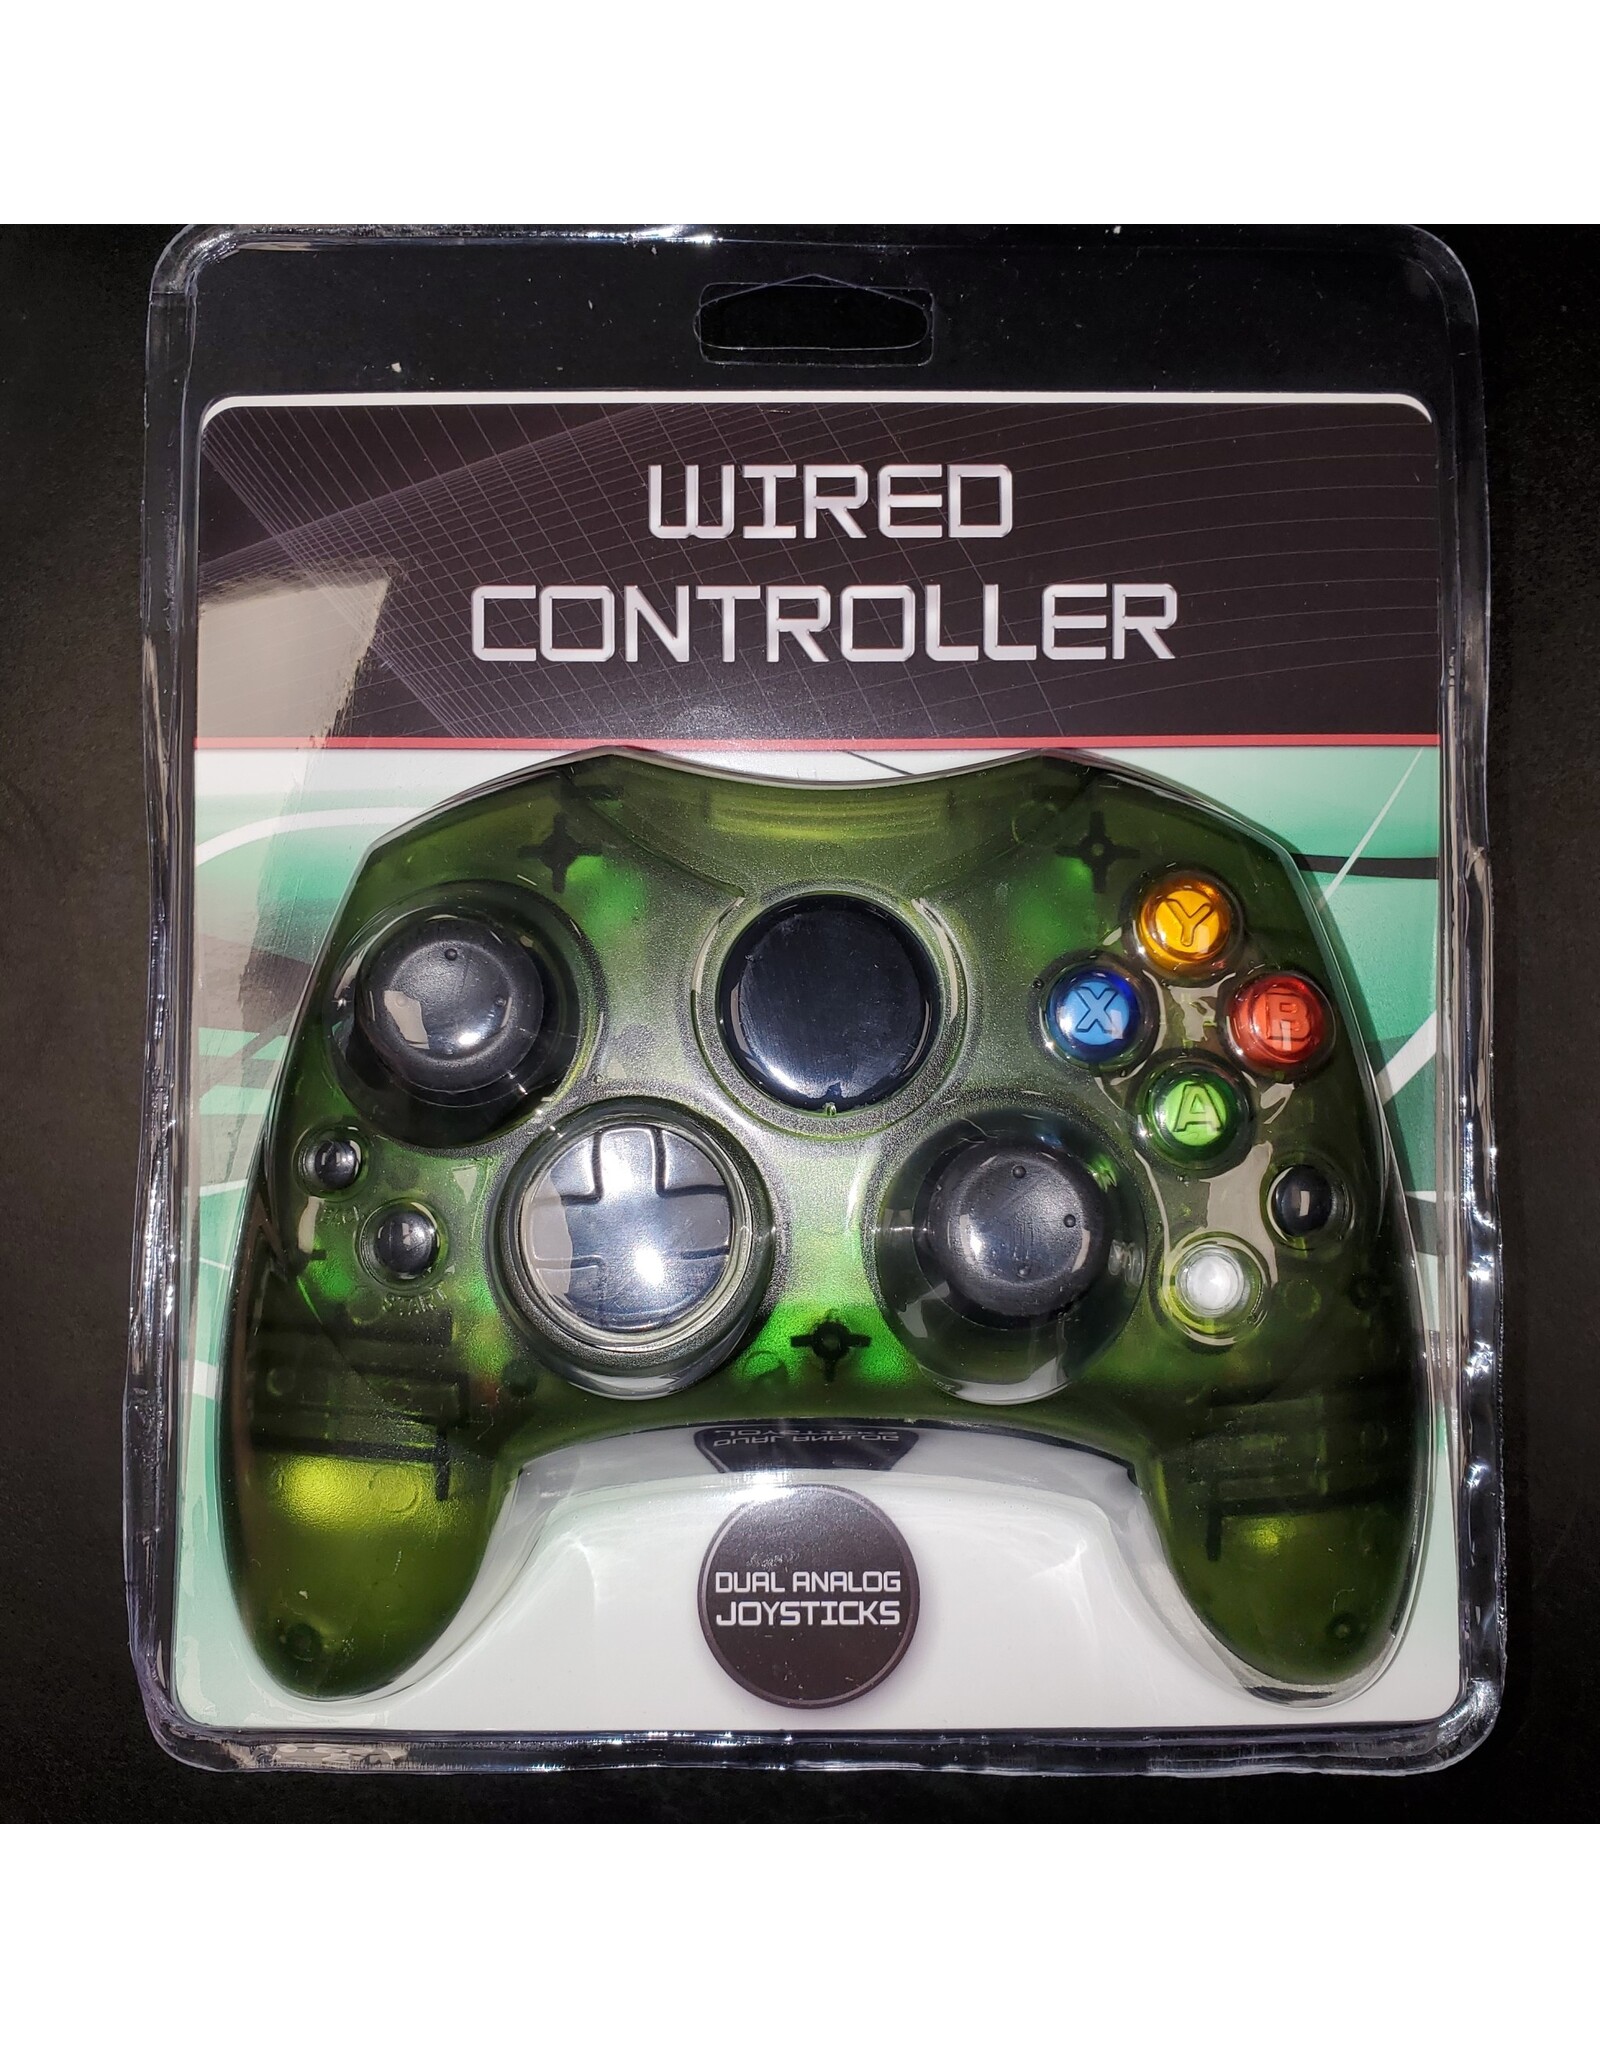 Xbox XBox Wired S-Type Controller Green (3rd Party, Brand New)